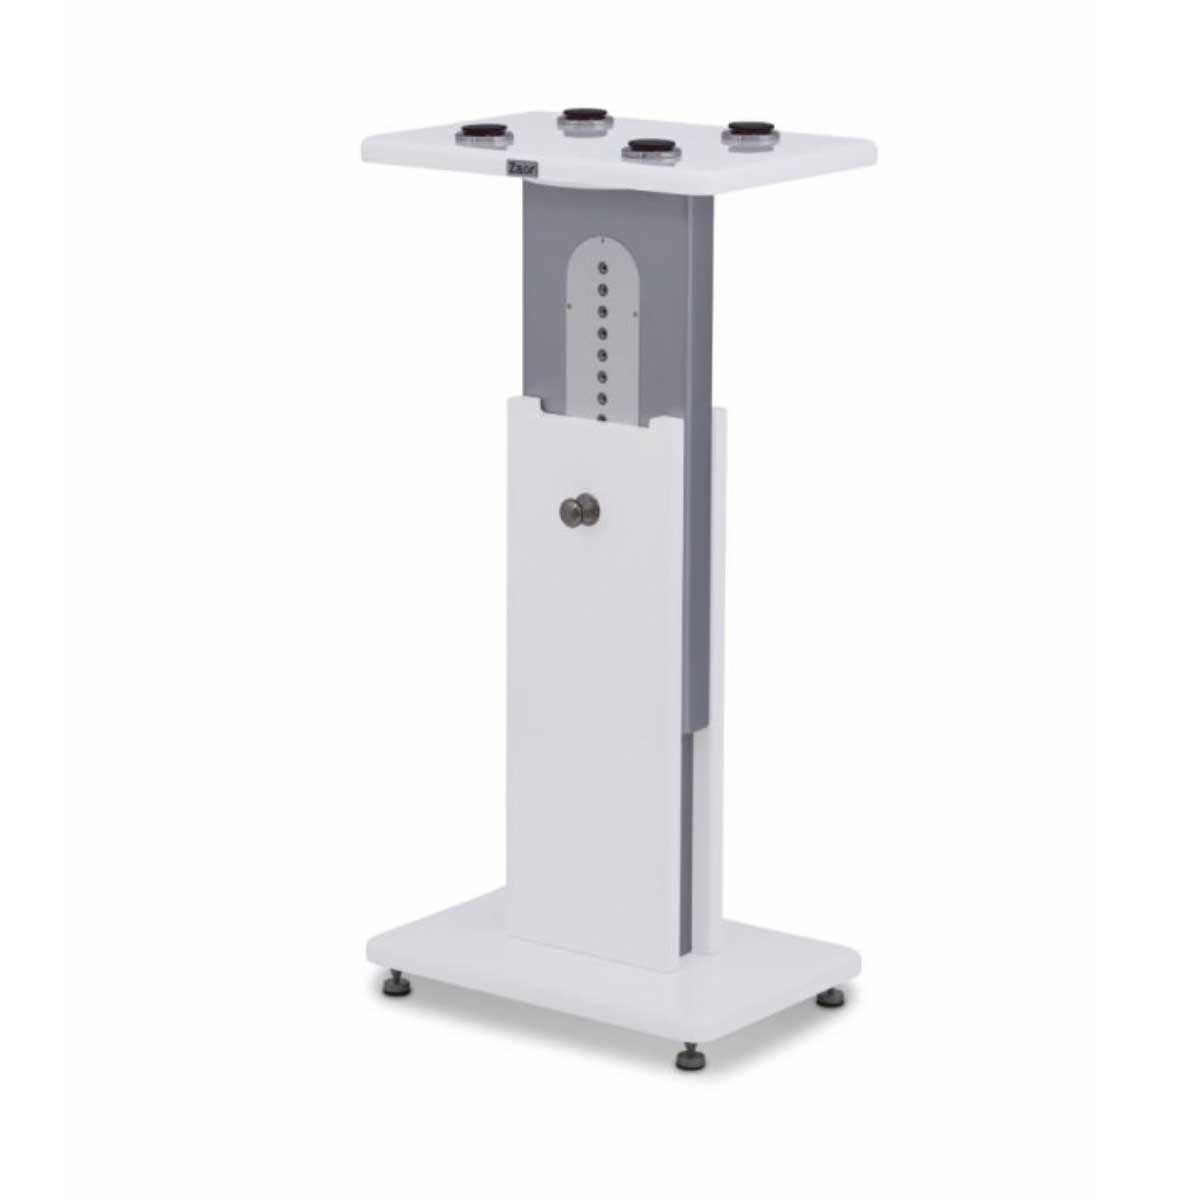 Zaor ISO Stand MkIII 600 Premium Height-Adjustable Spaker Stand with Isoacoustic Isopucks - White